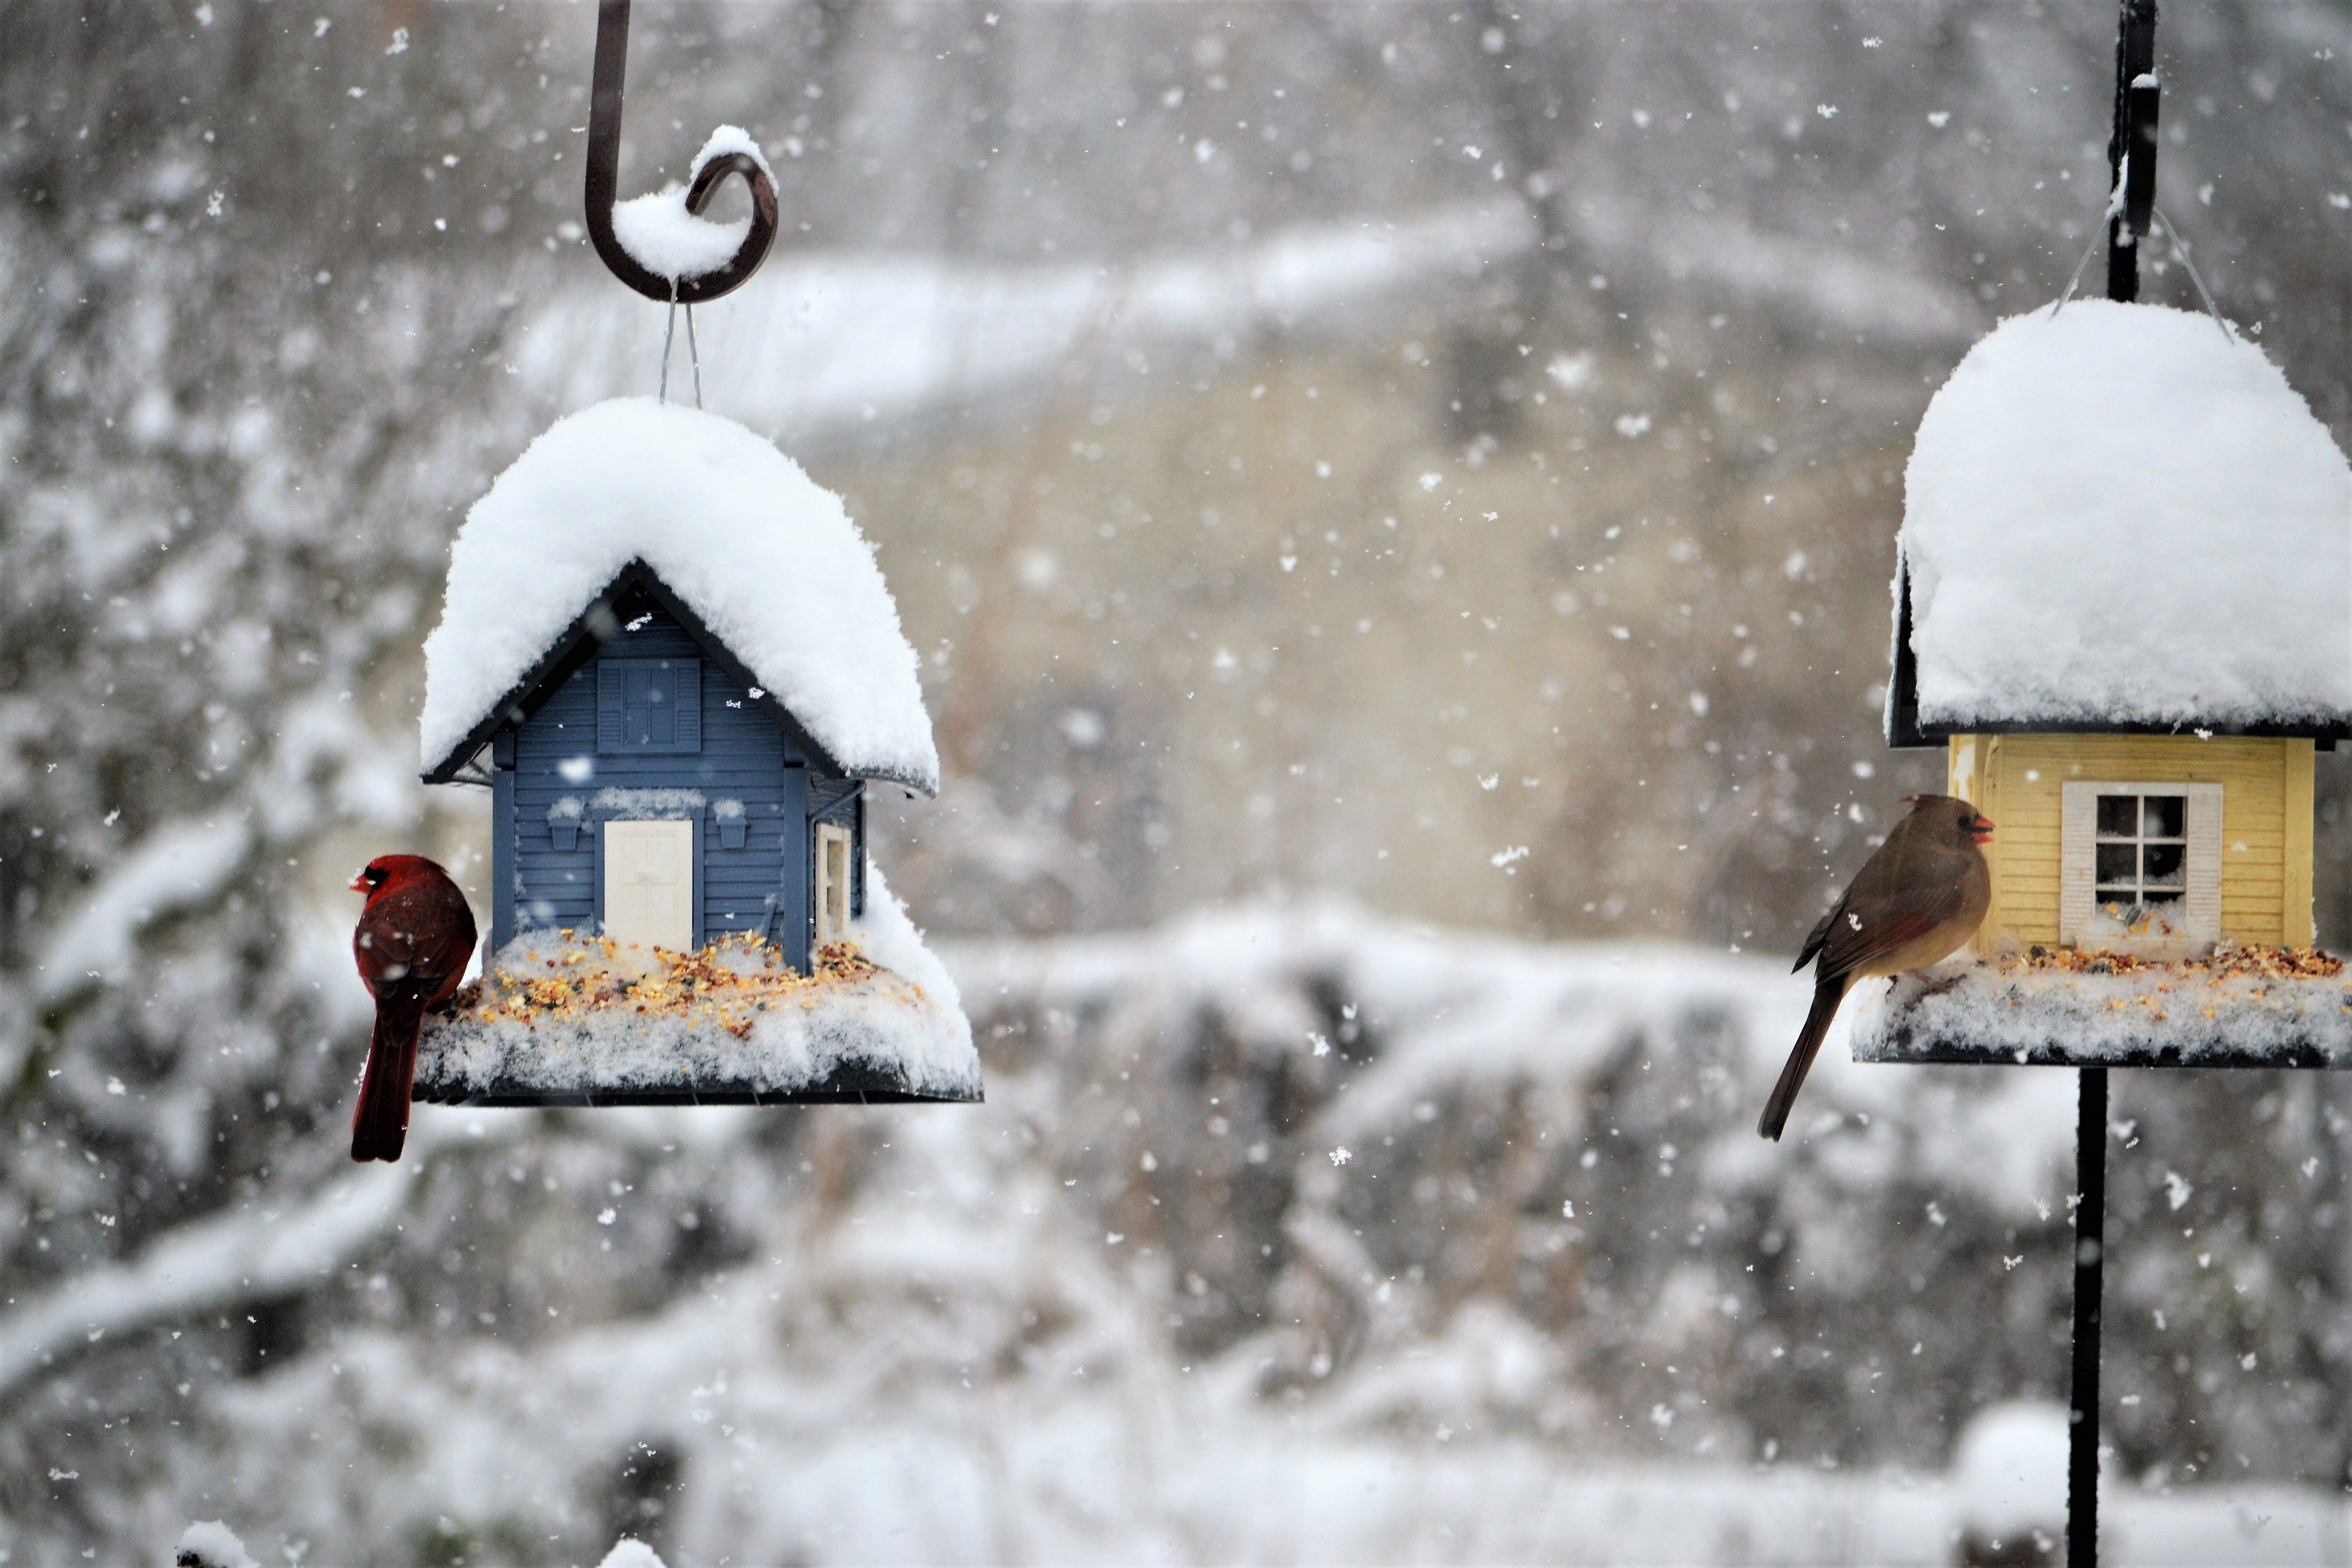 There are ways to tell if your bird is cold and if you need to take action.